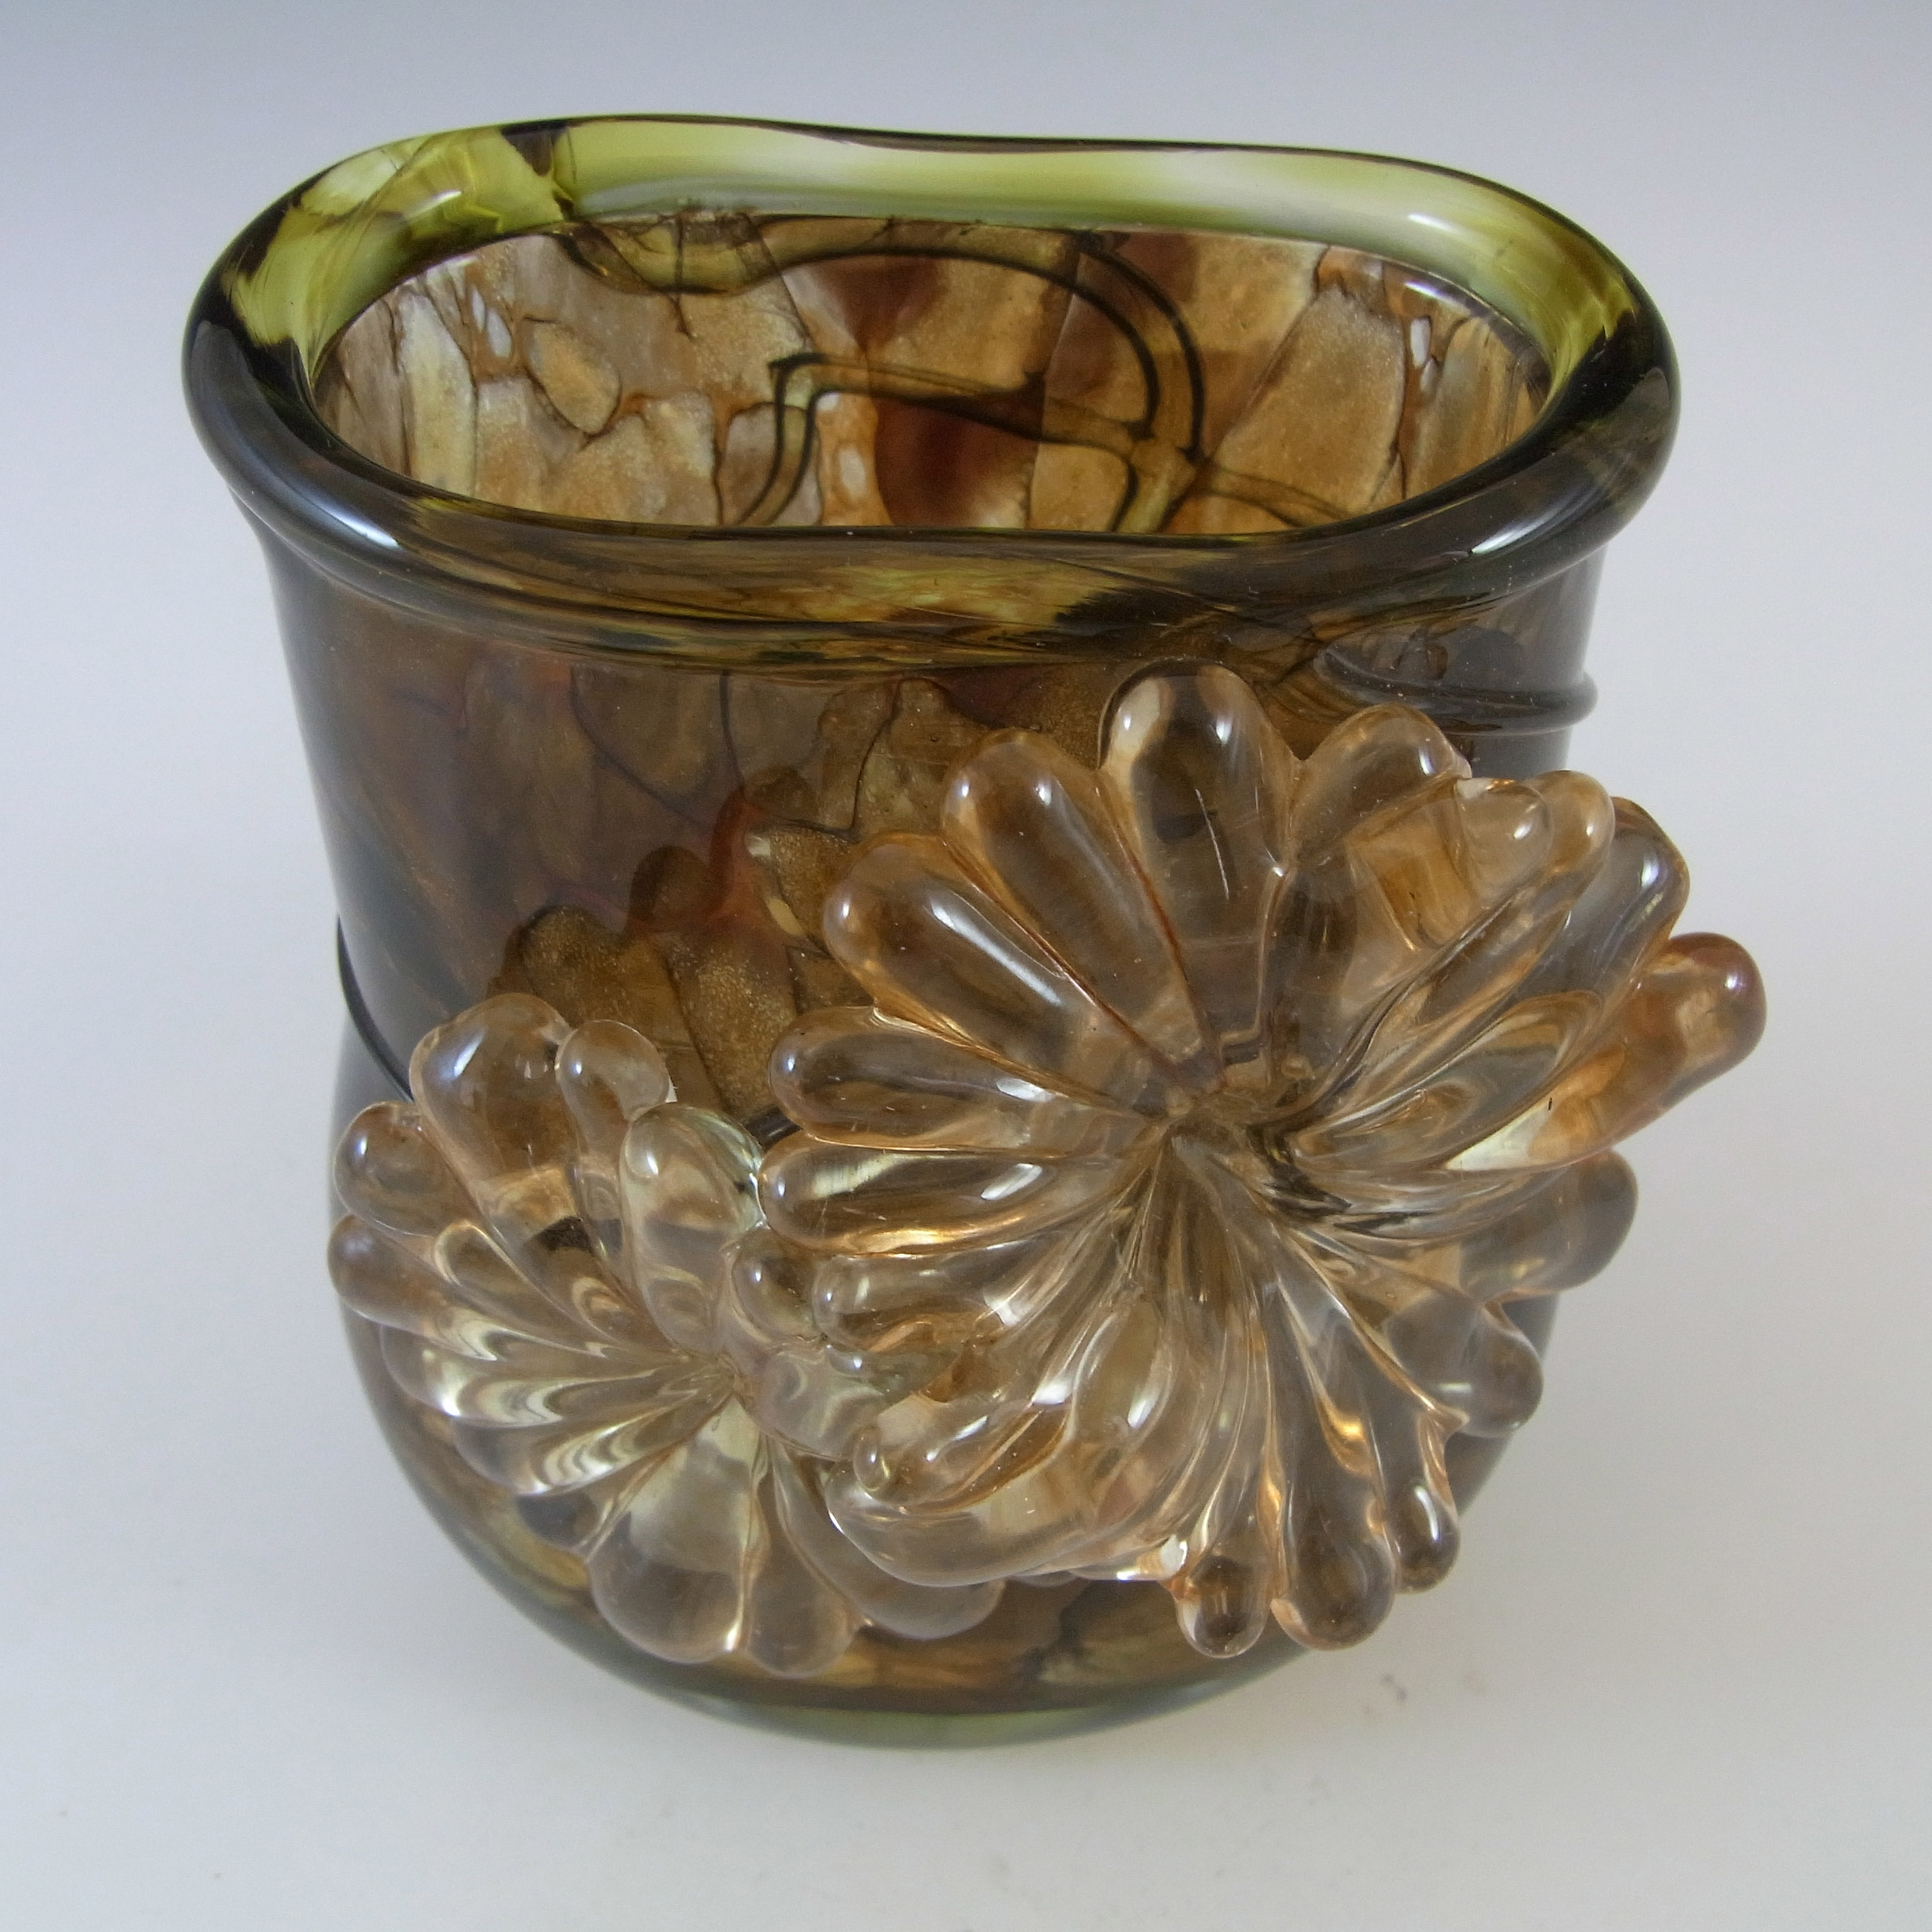 Isle of Wight Studio 'Four Seasons - Autumn' Brown Glass Vase - Click Image to Close